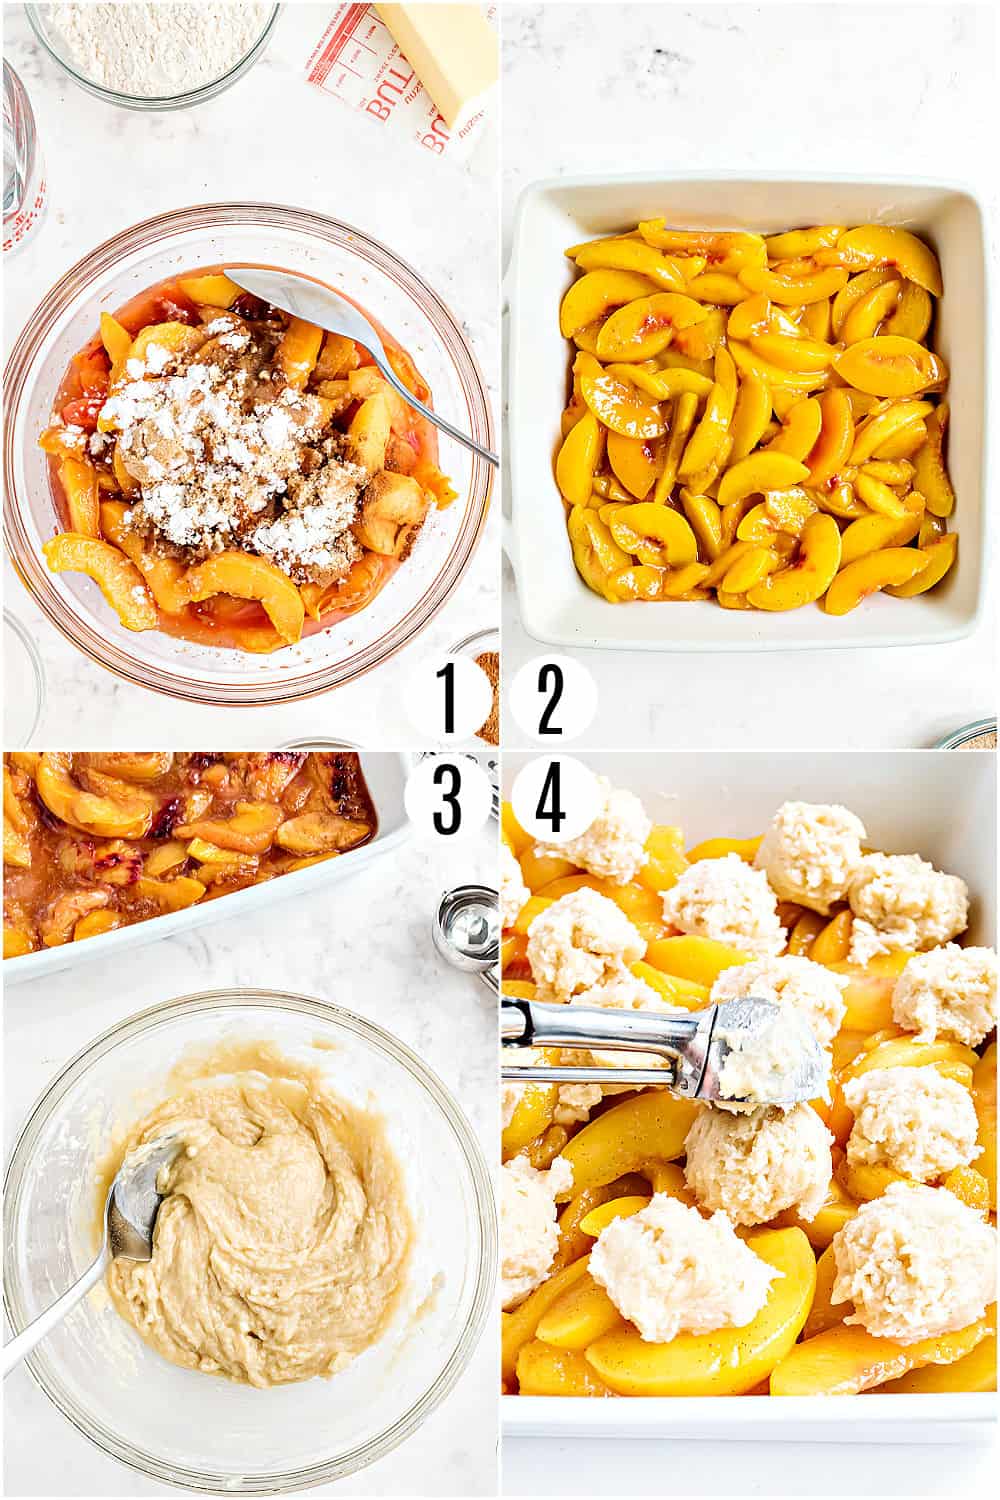 Step by step photos showing how to make peach cobbler.